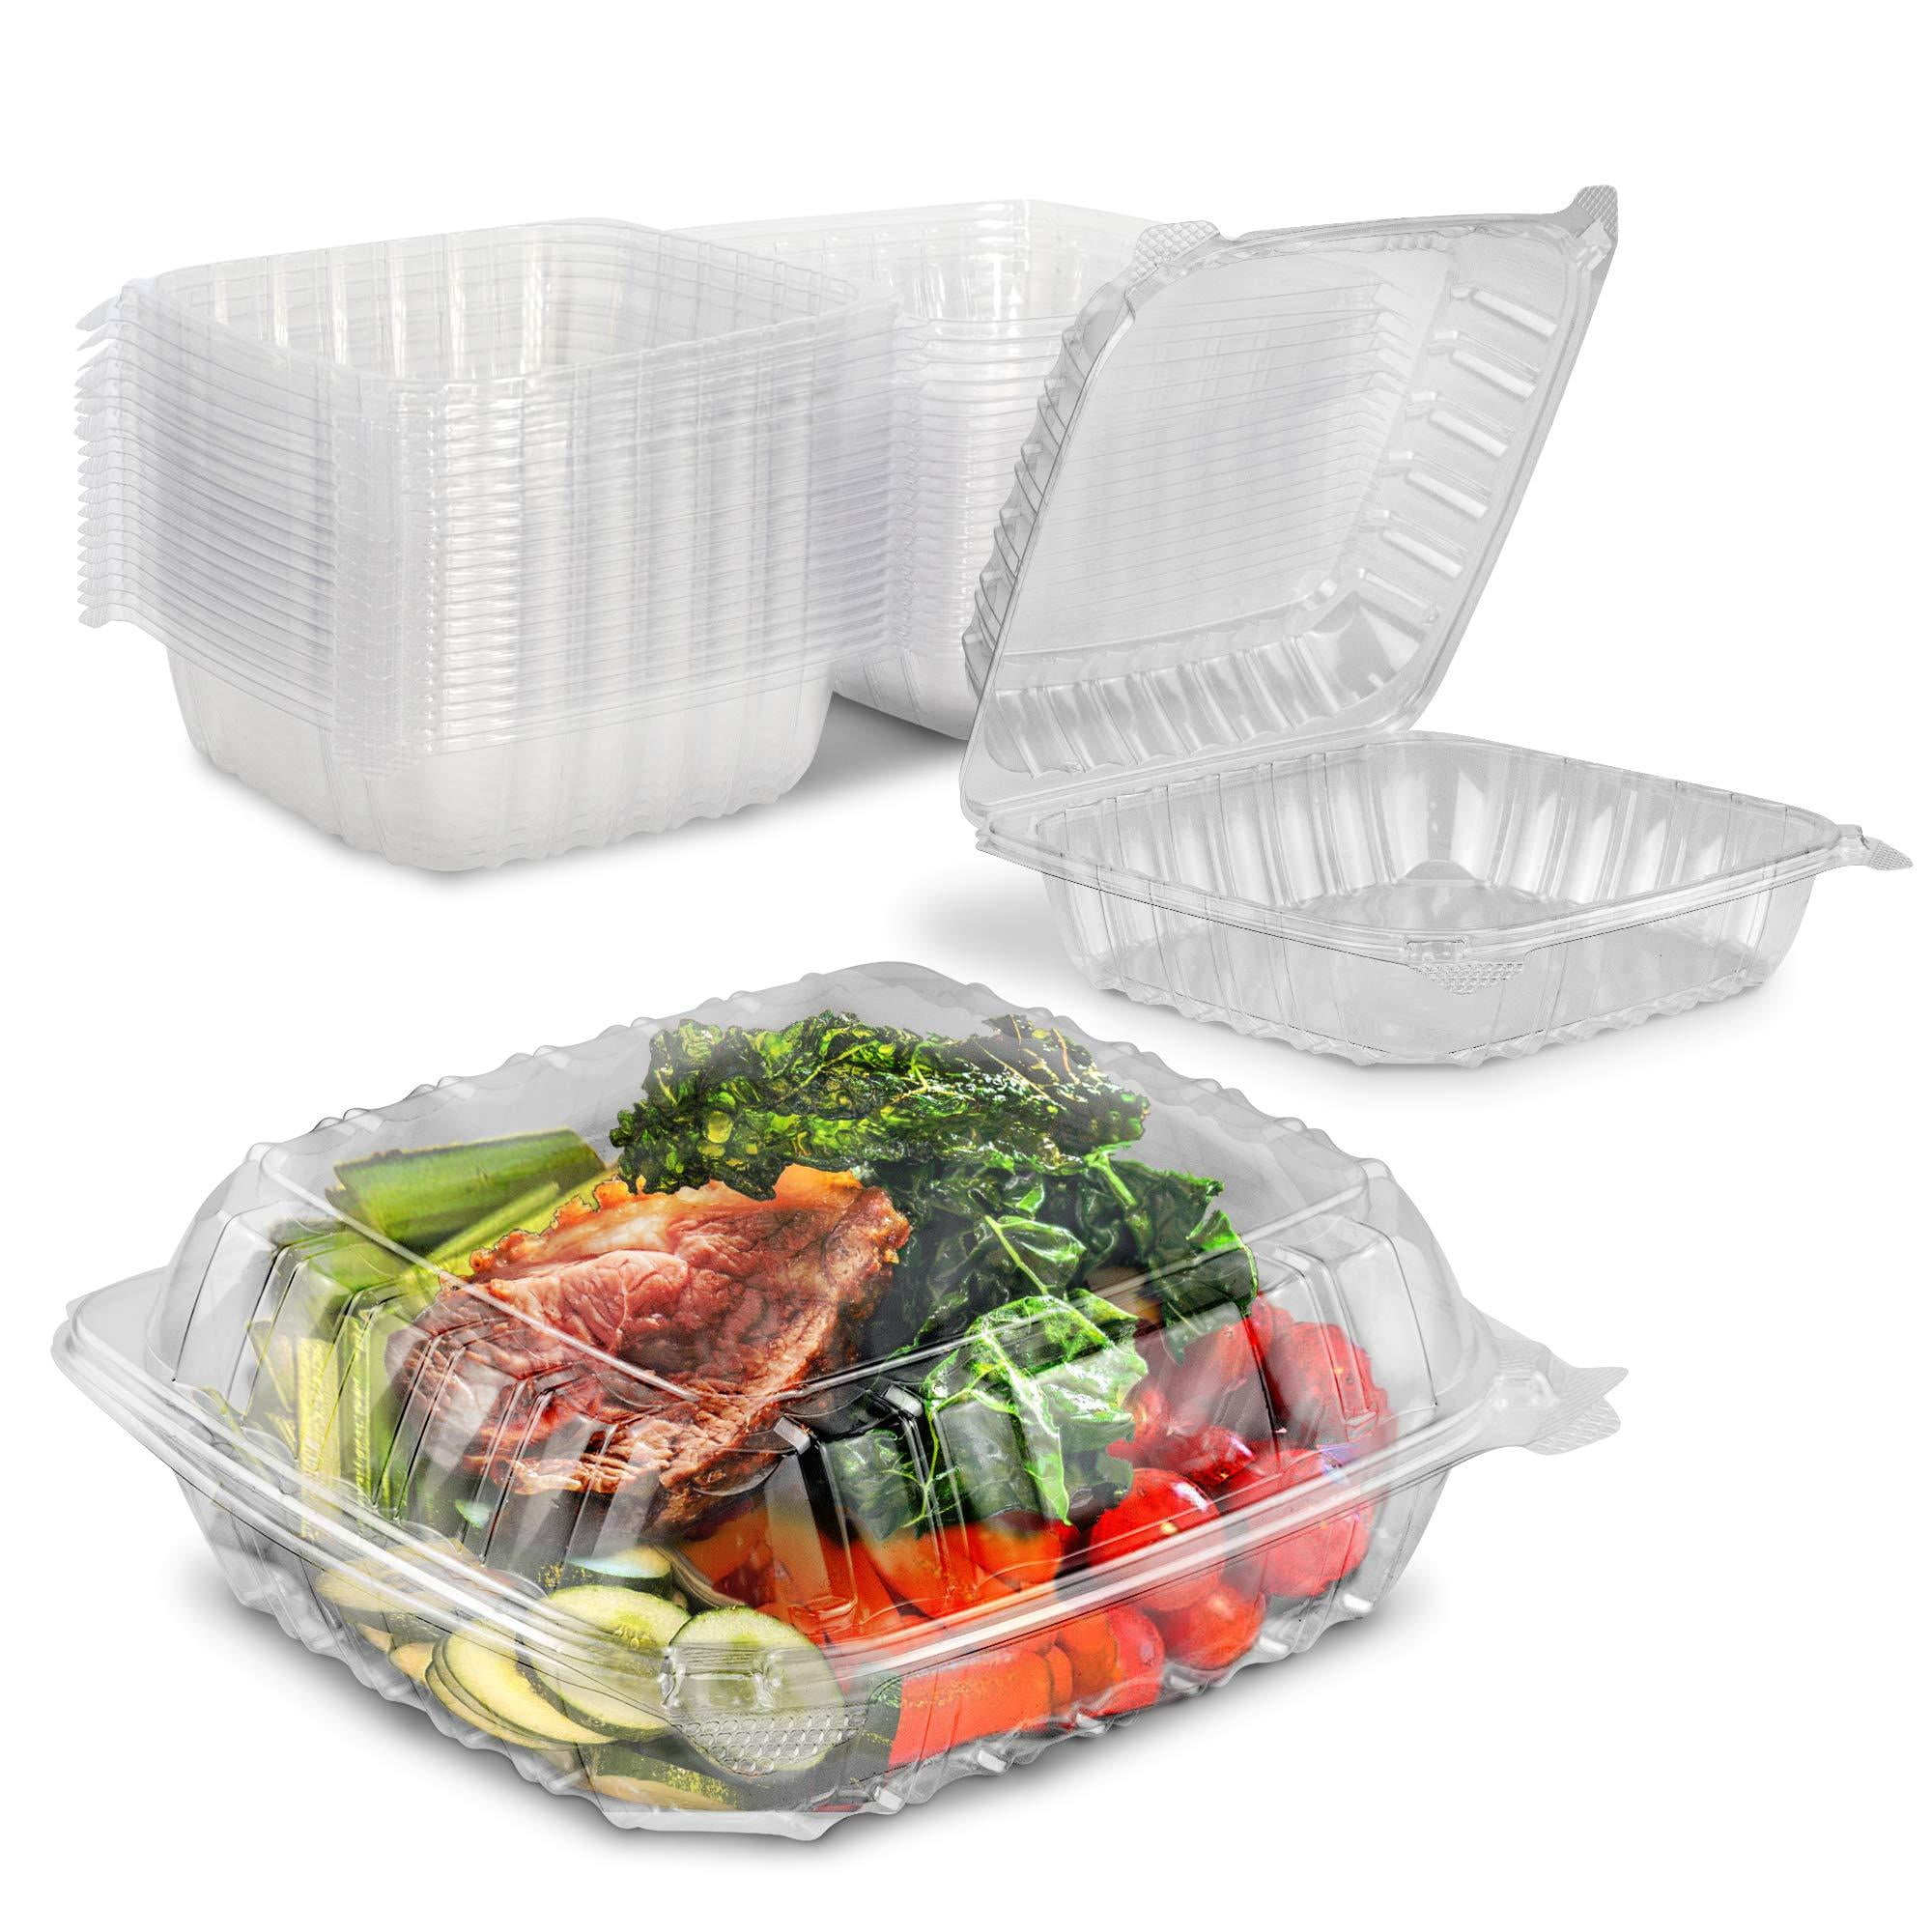 5 " Disposable Clear Clam shell Display Containers Fits Most 5" Pans